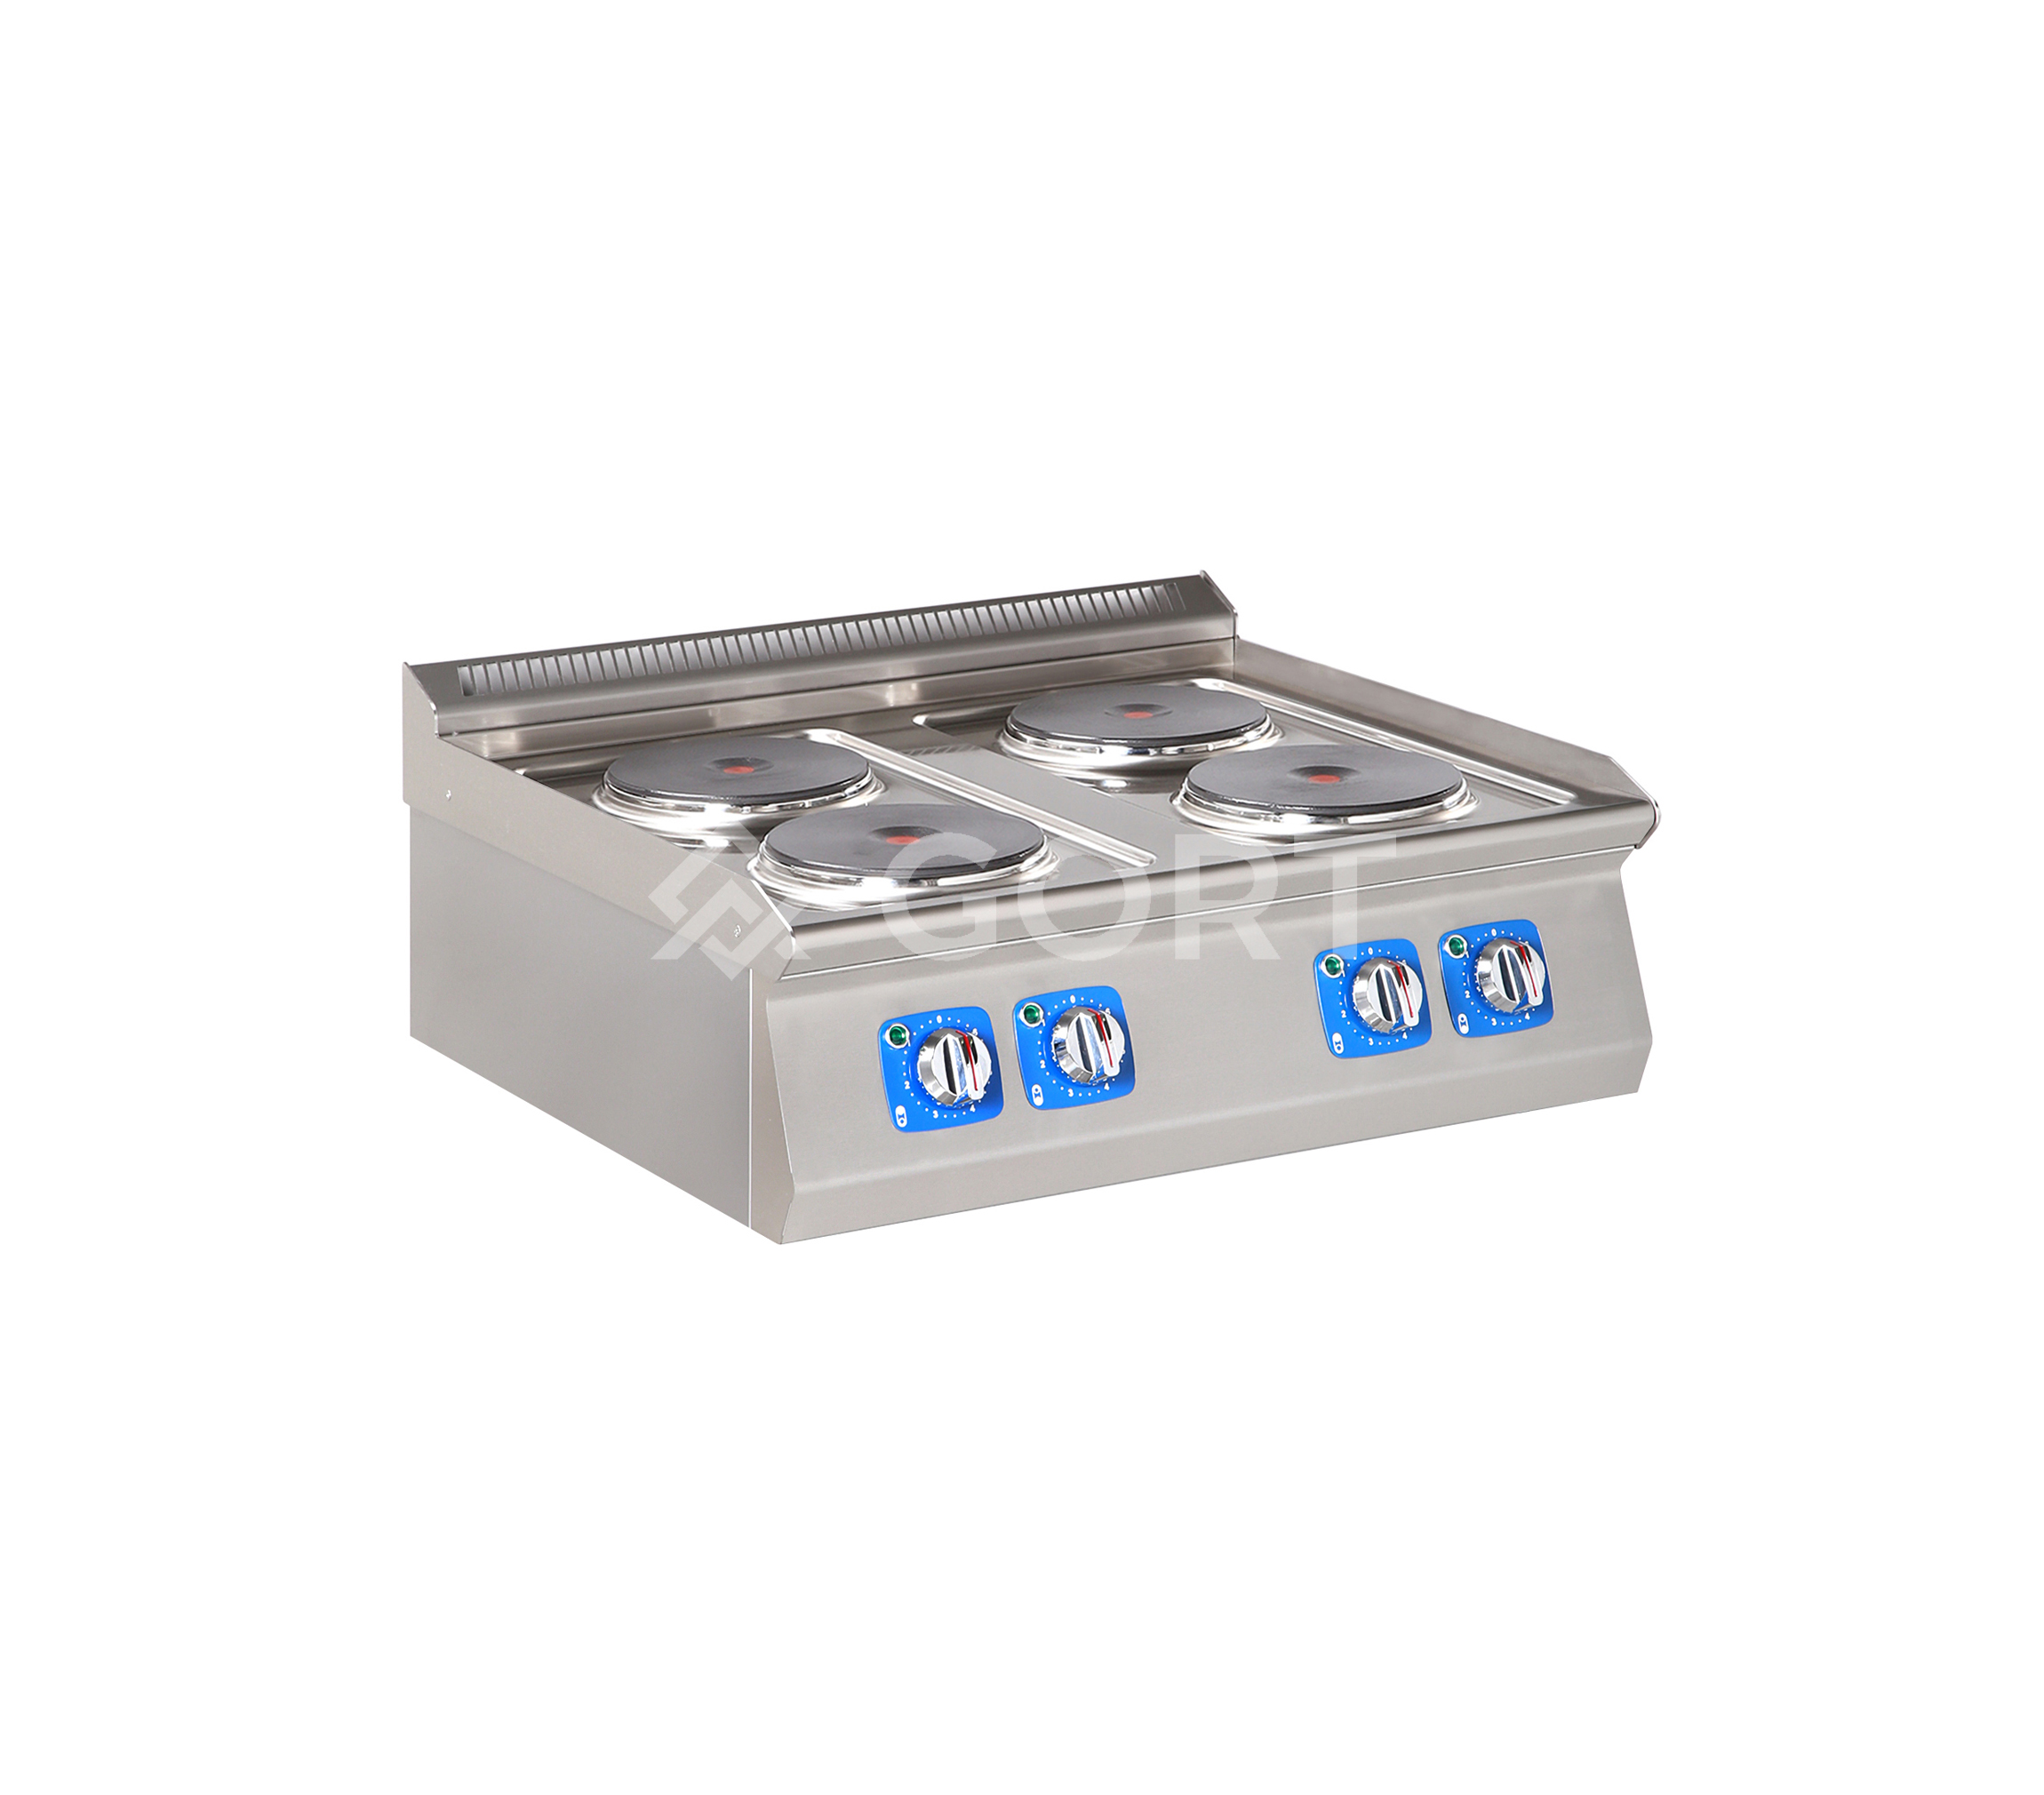 4 plate electric cooking top